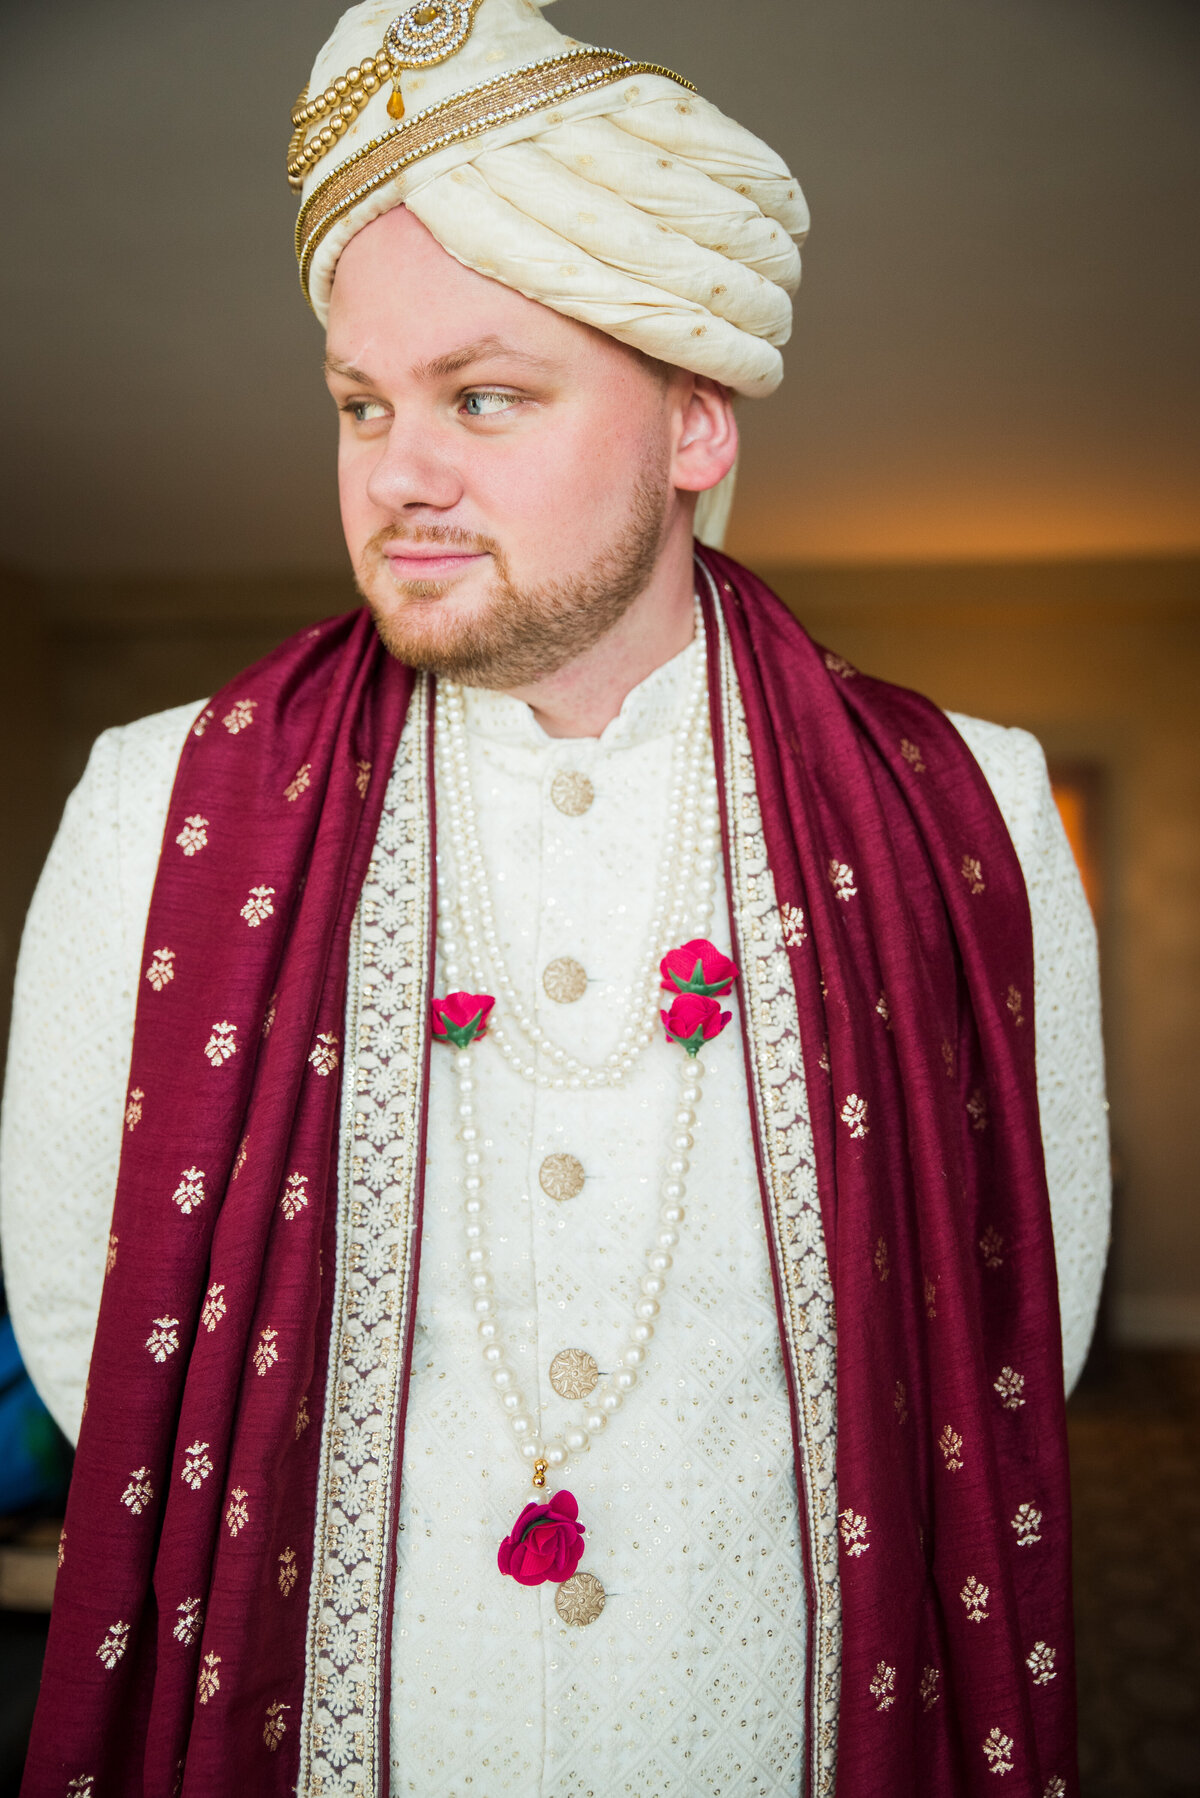 A groom looks off camera, dressed in the traditional Indian wedding attire.